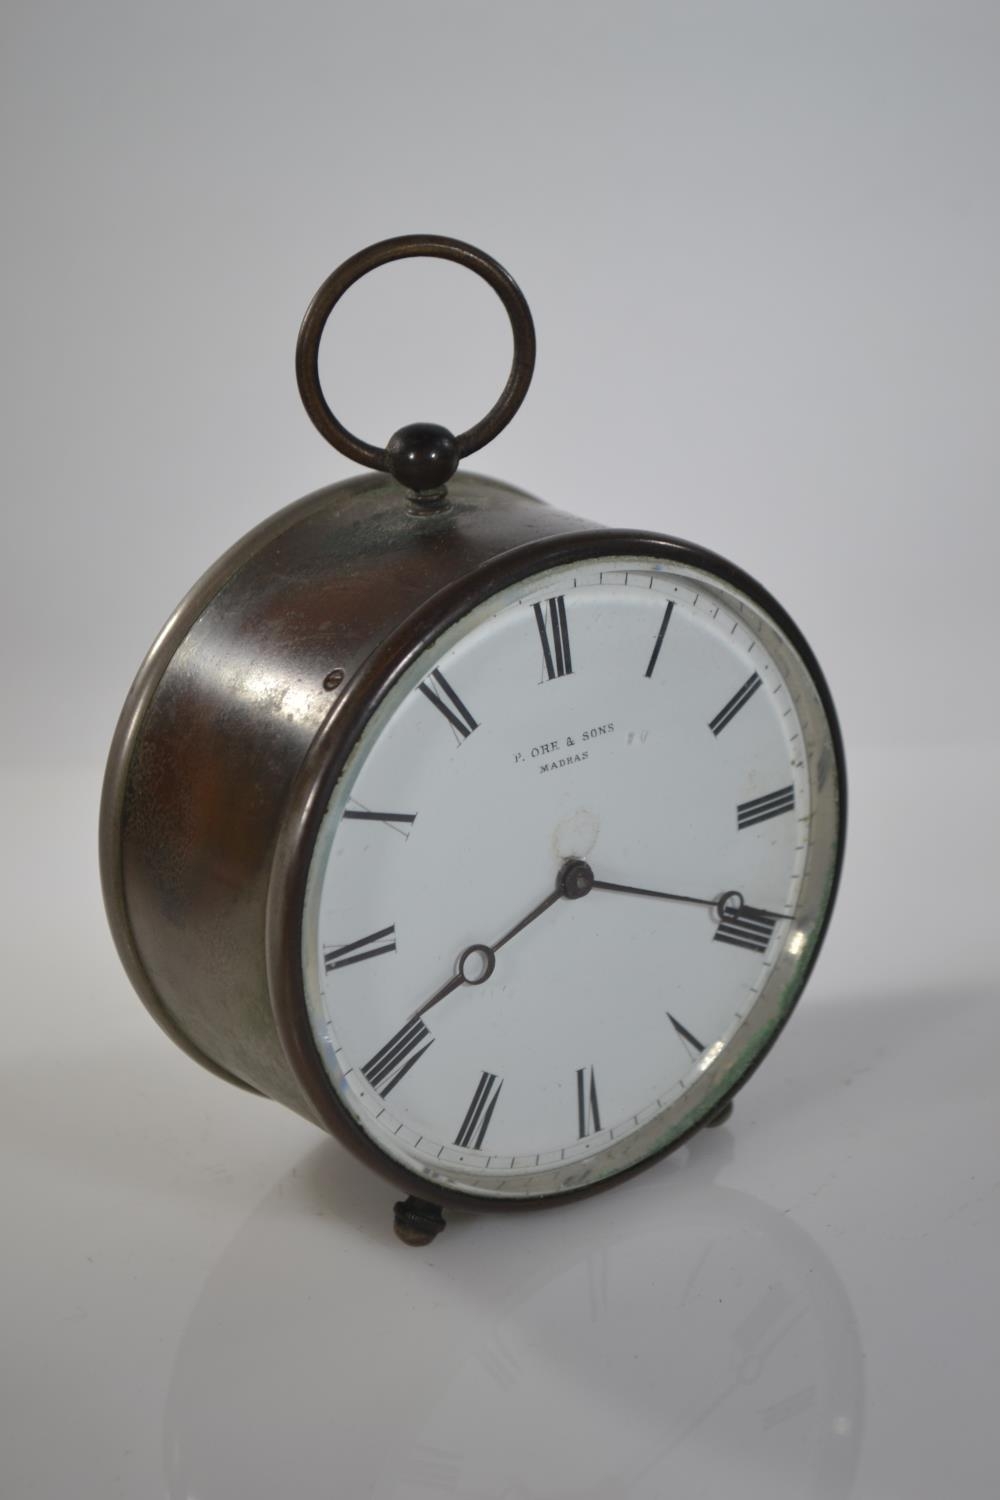 French V.A.P Brevete drum clock retailed by P. Ore & sons Madras, with key, dia. 9.5cm 